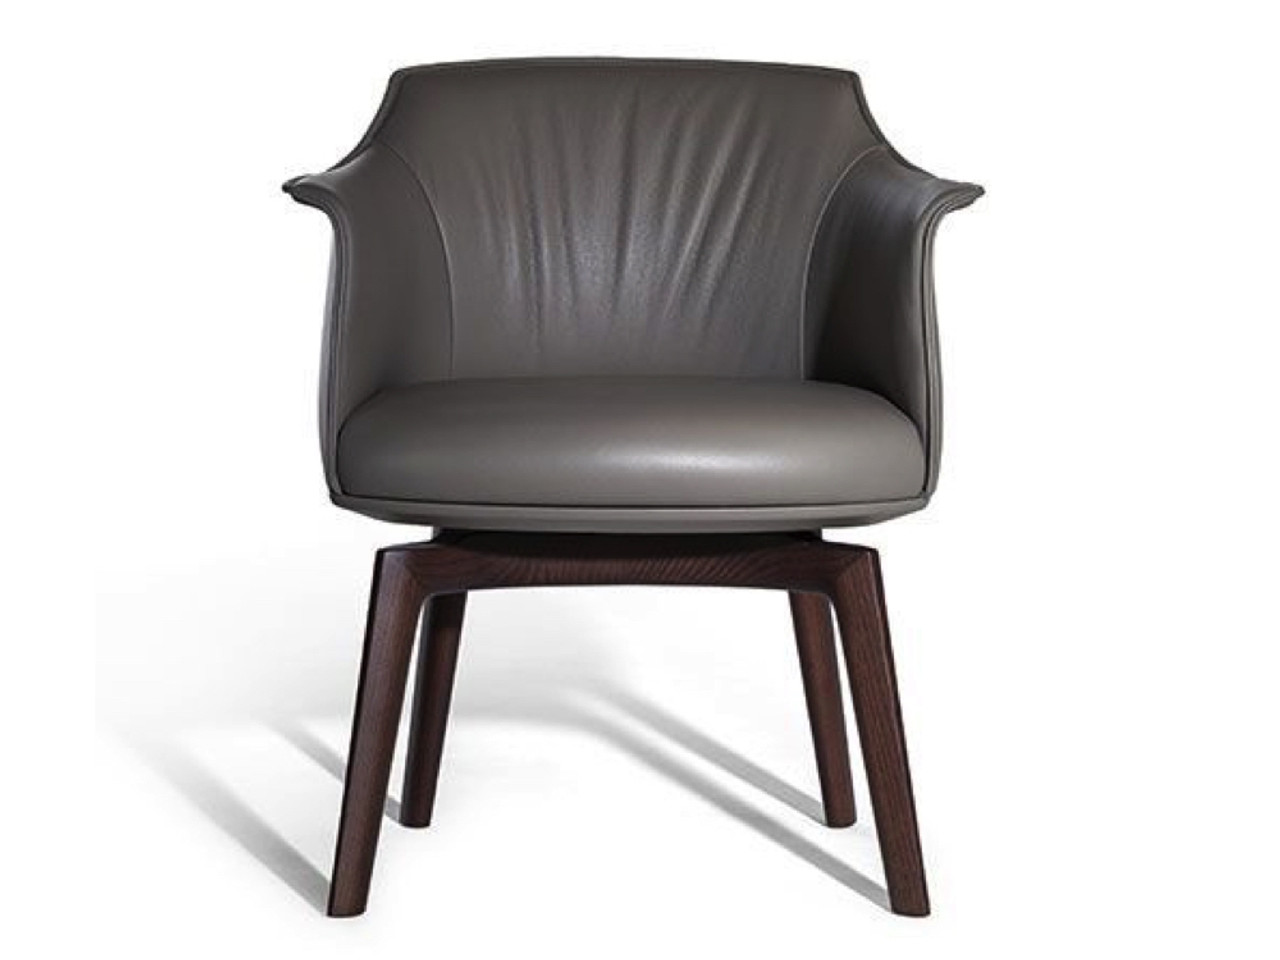 An Inside Look at Poltrona Frau Chair Design and Quality插图3